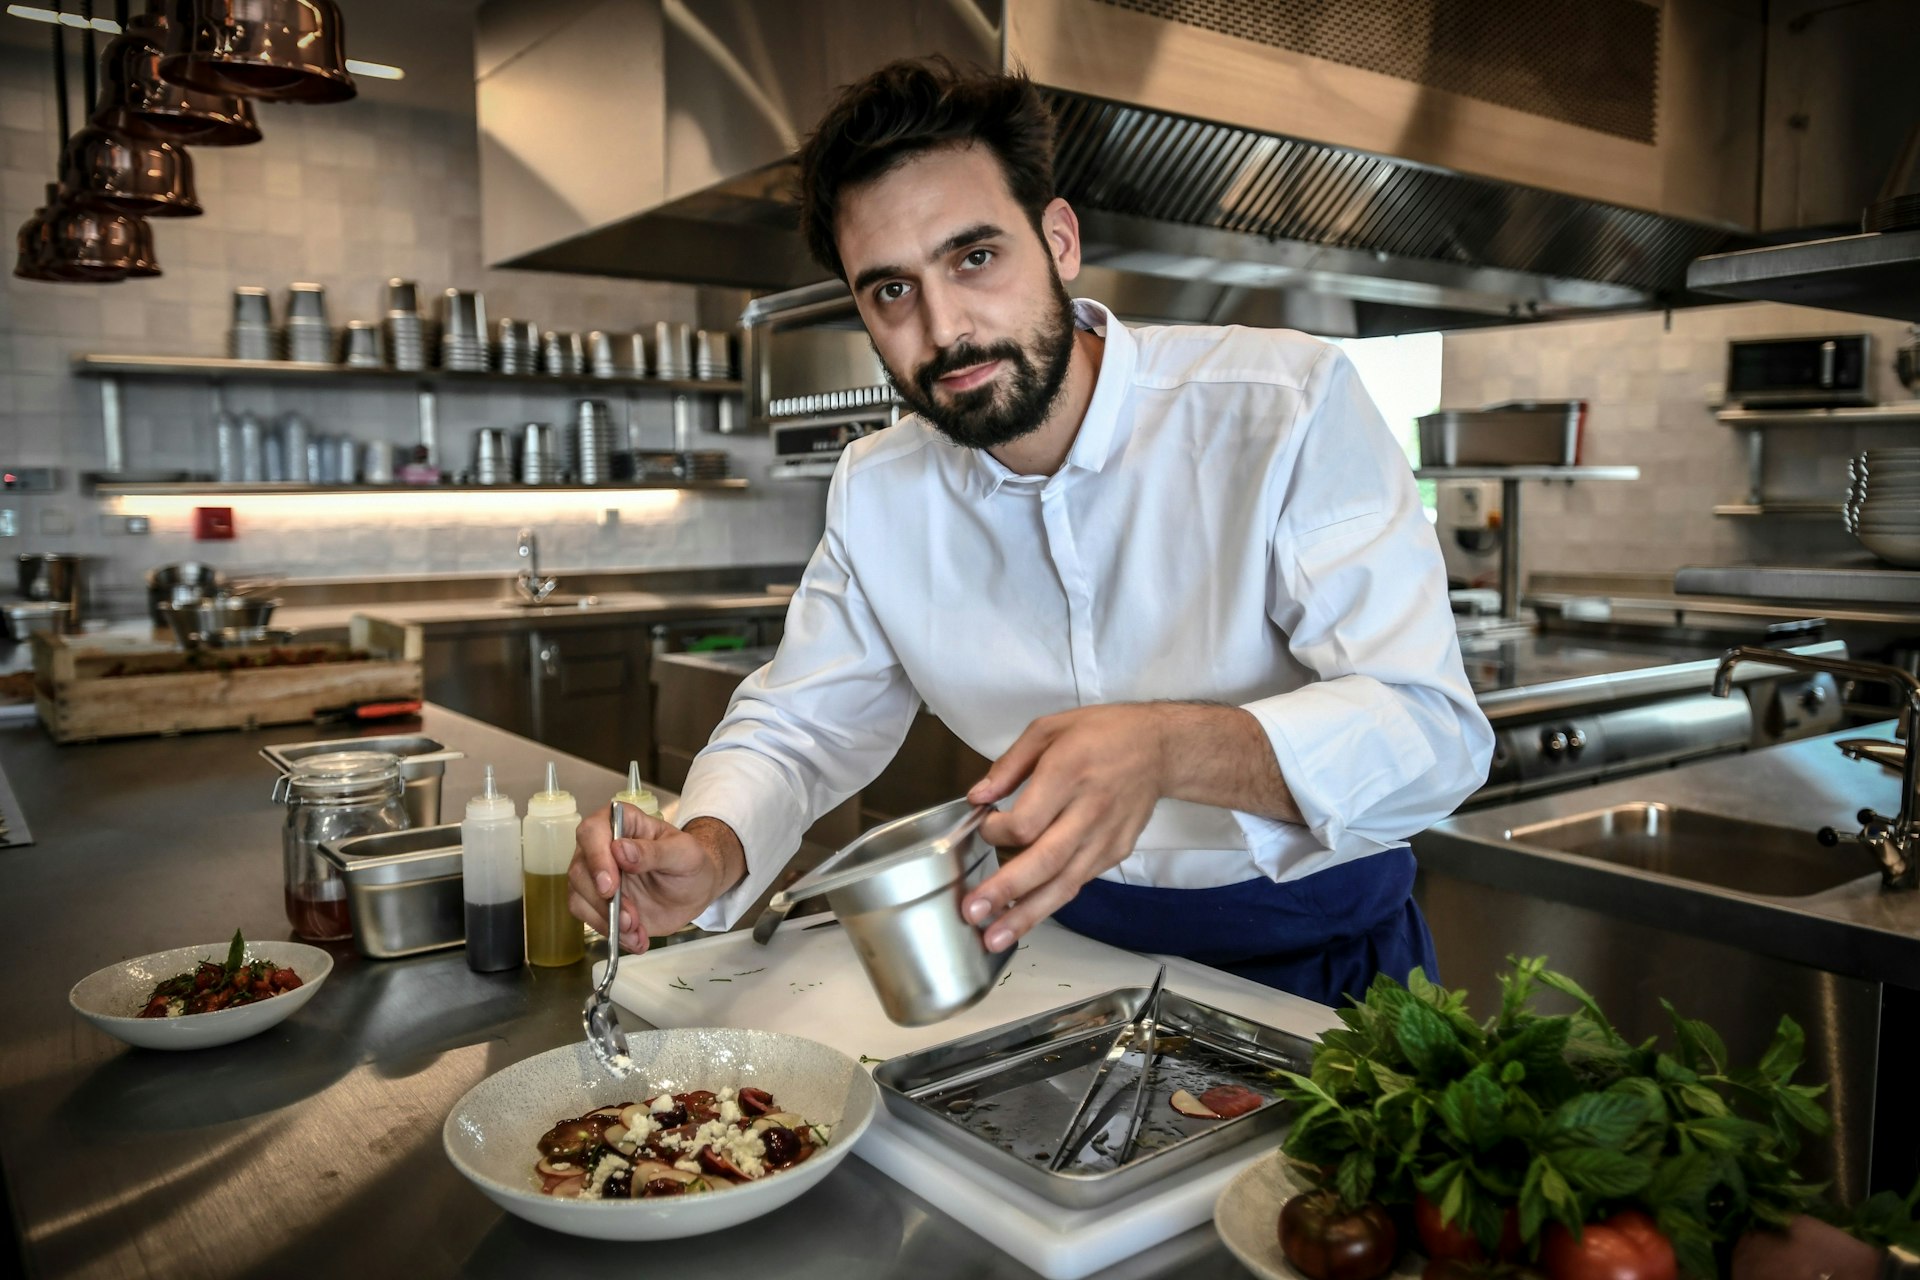 French chef of the Perchoir restaurant, Jeremy Claudepierre poses in a kitchen